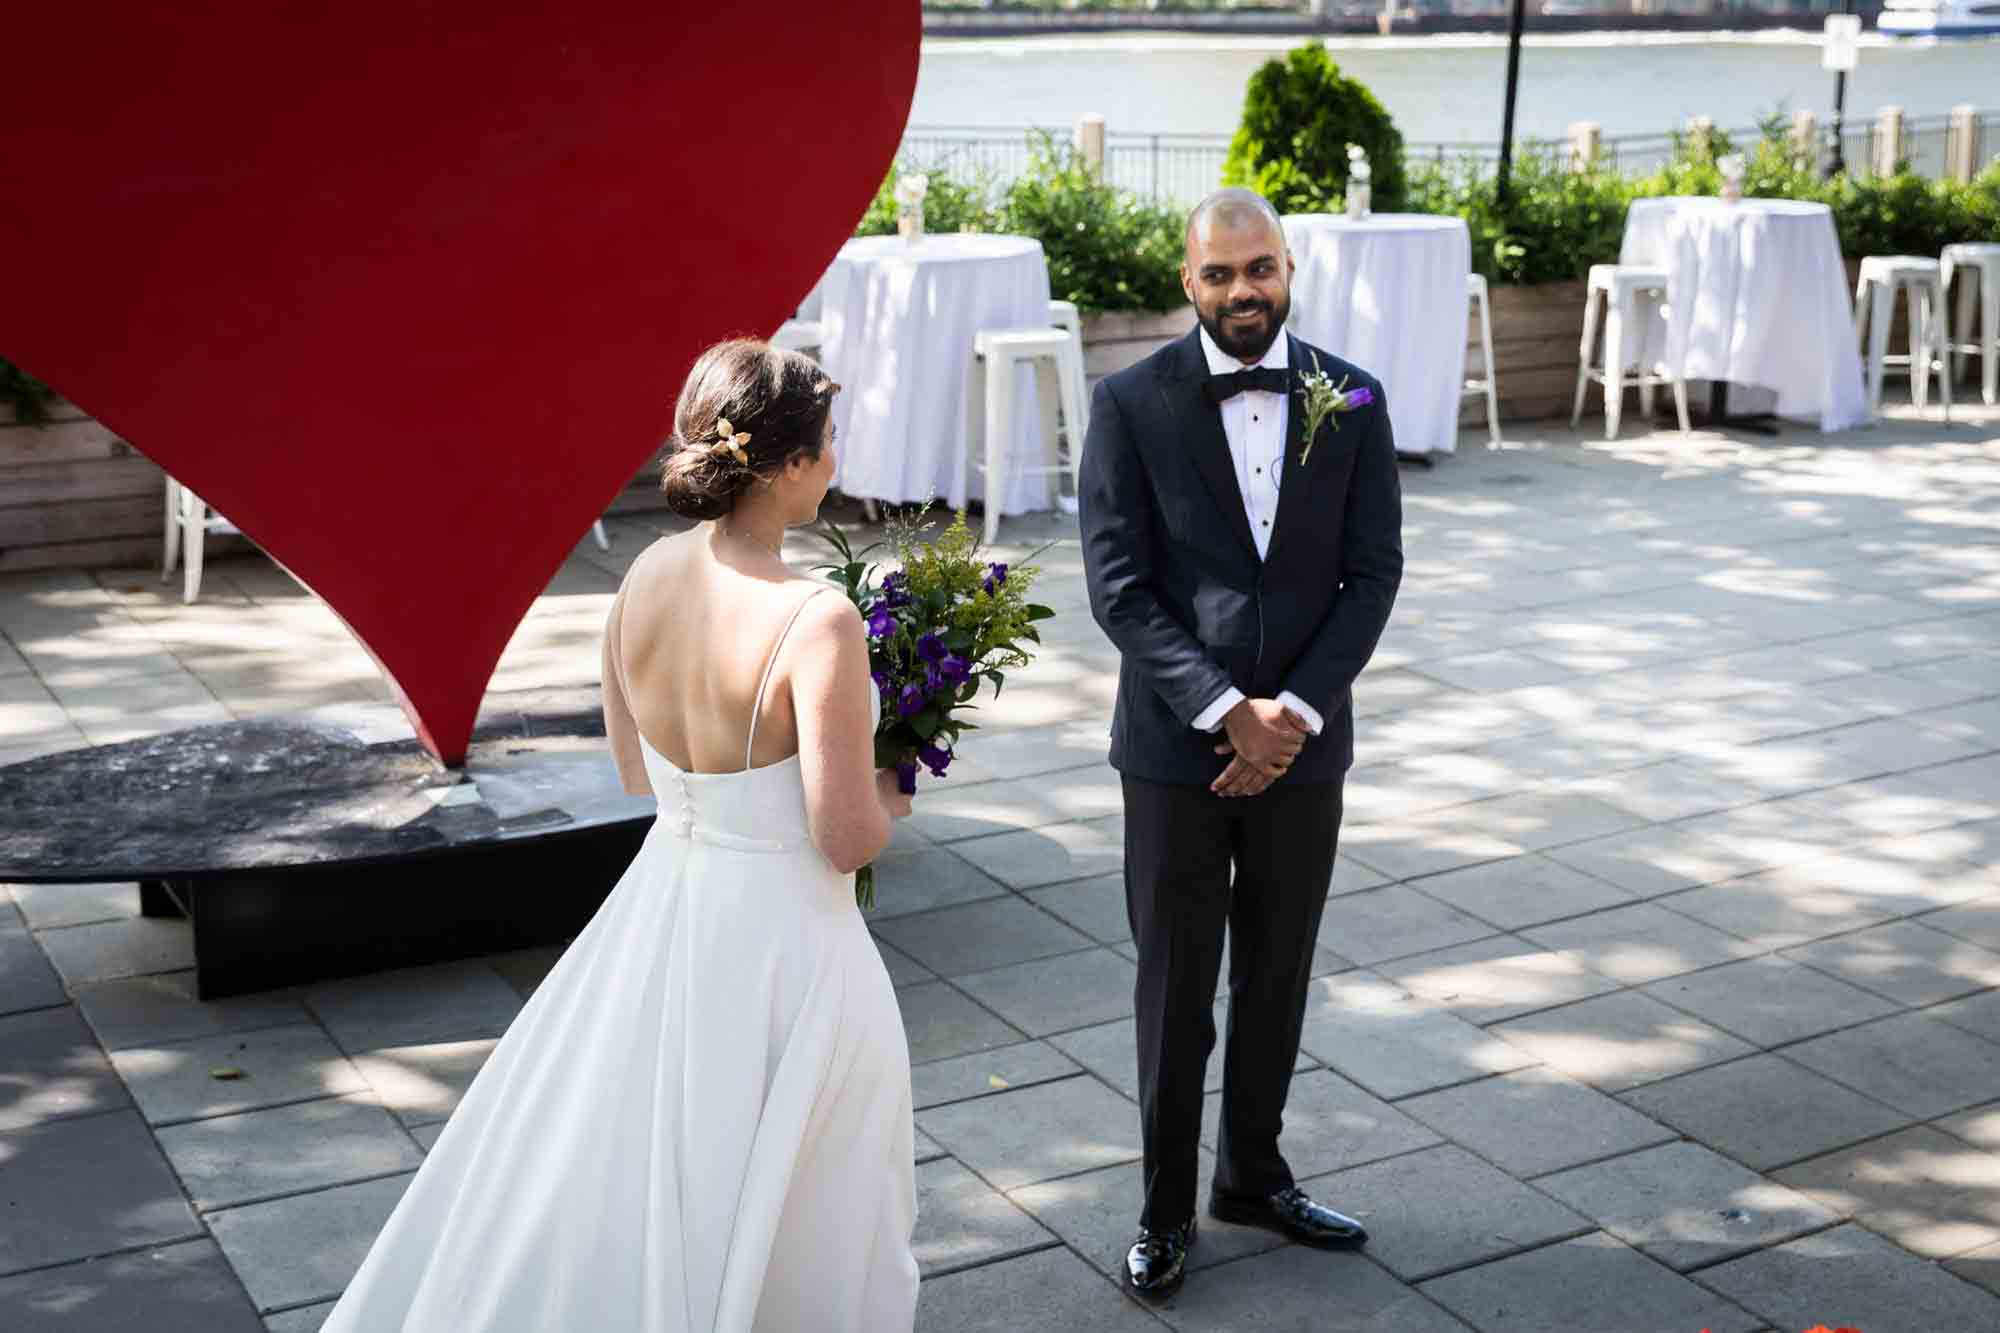 Groom wearing tux seeing bride in dress for first time on outdoor patio at a Sanctuary Roosevelt Island wedding